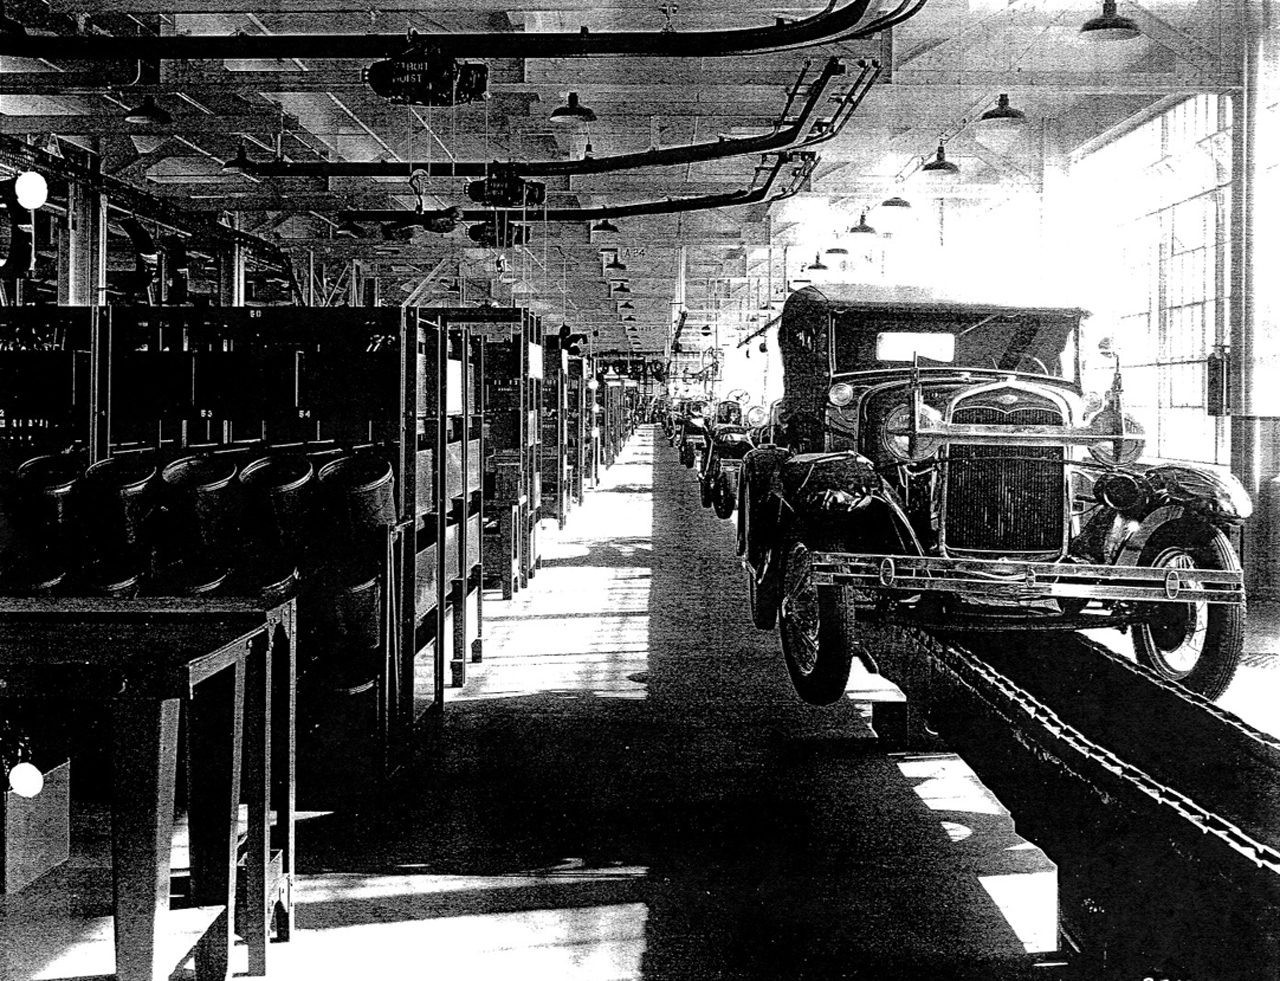 Assembly line in 1920s henry ford #6